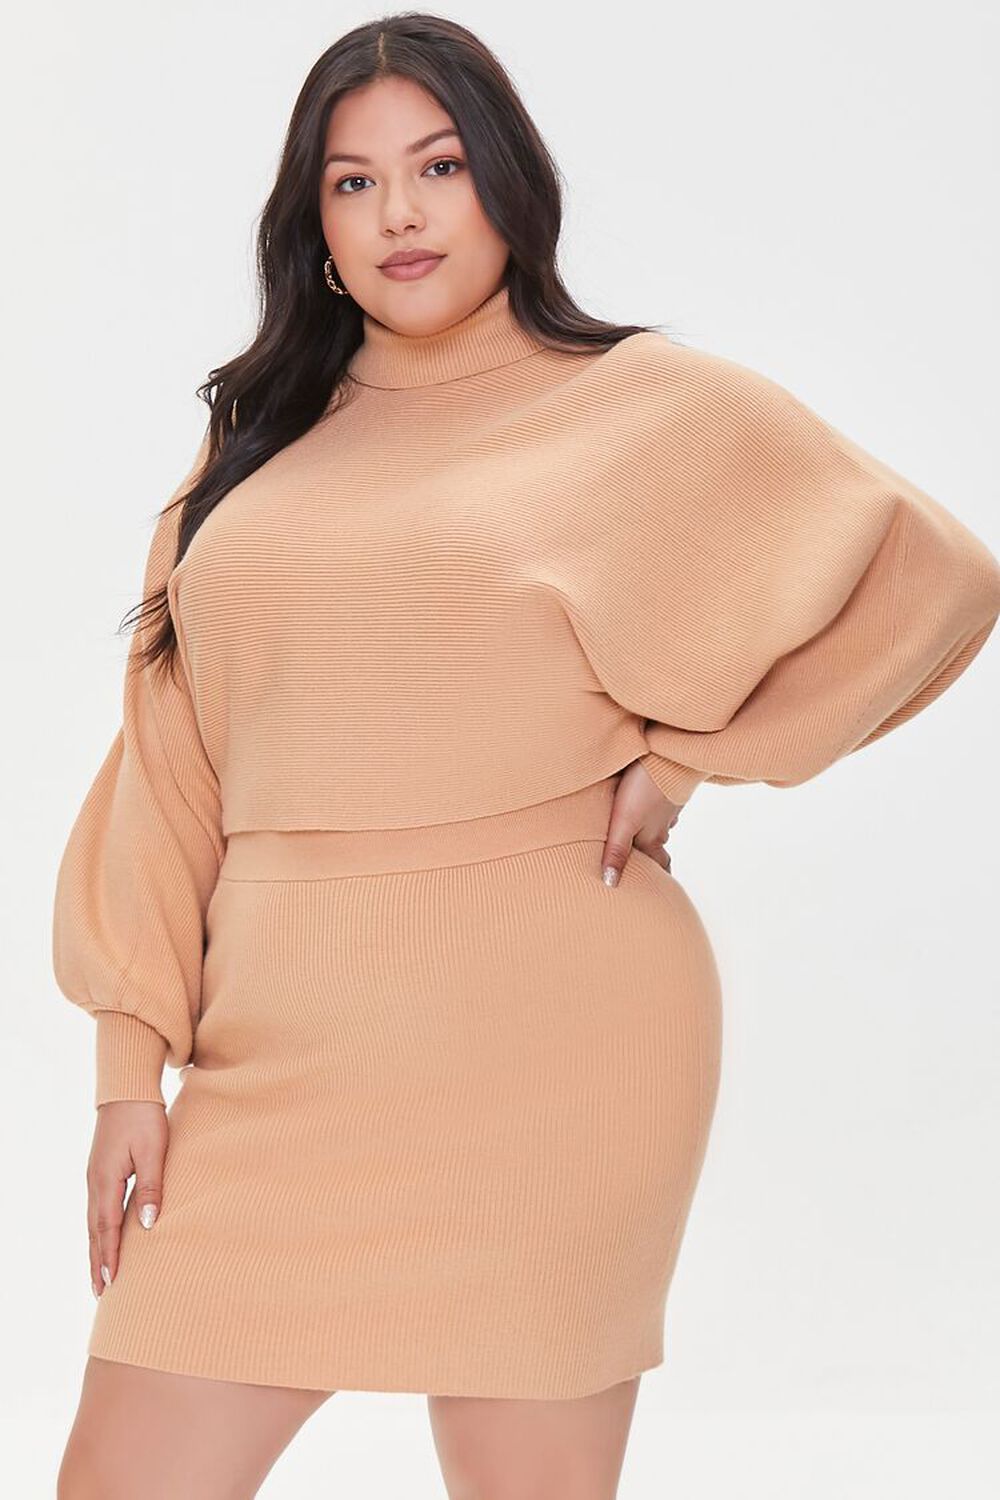 TAUPE Plus Size Sweater-Knit Top & Skirt Set, image 1